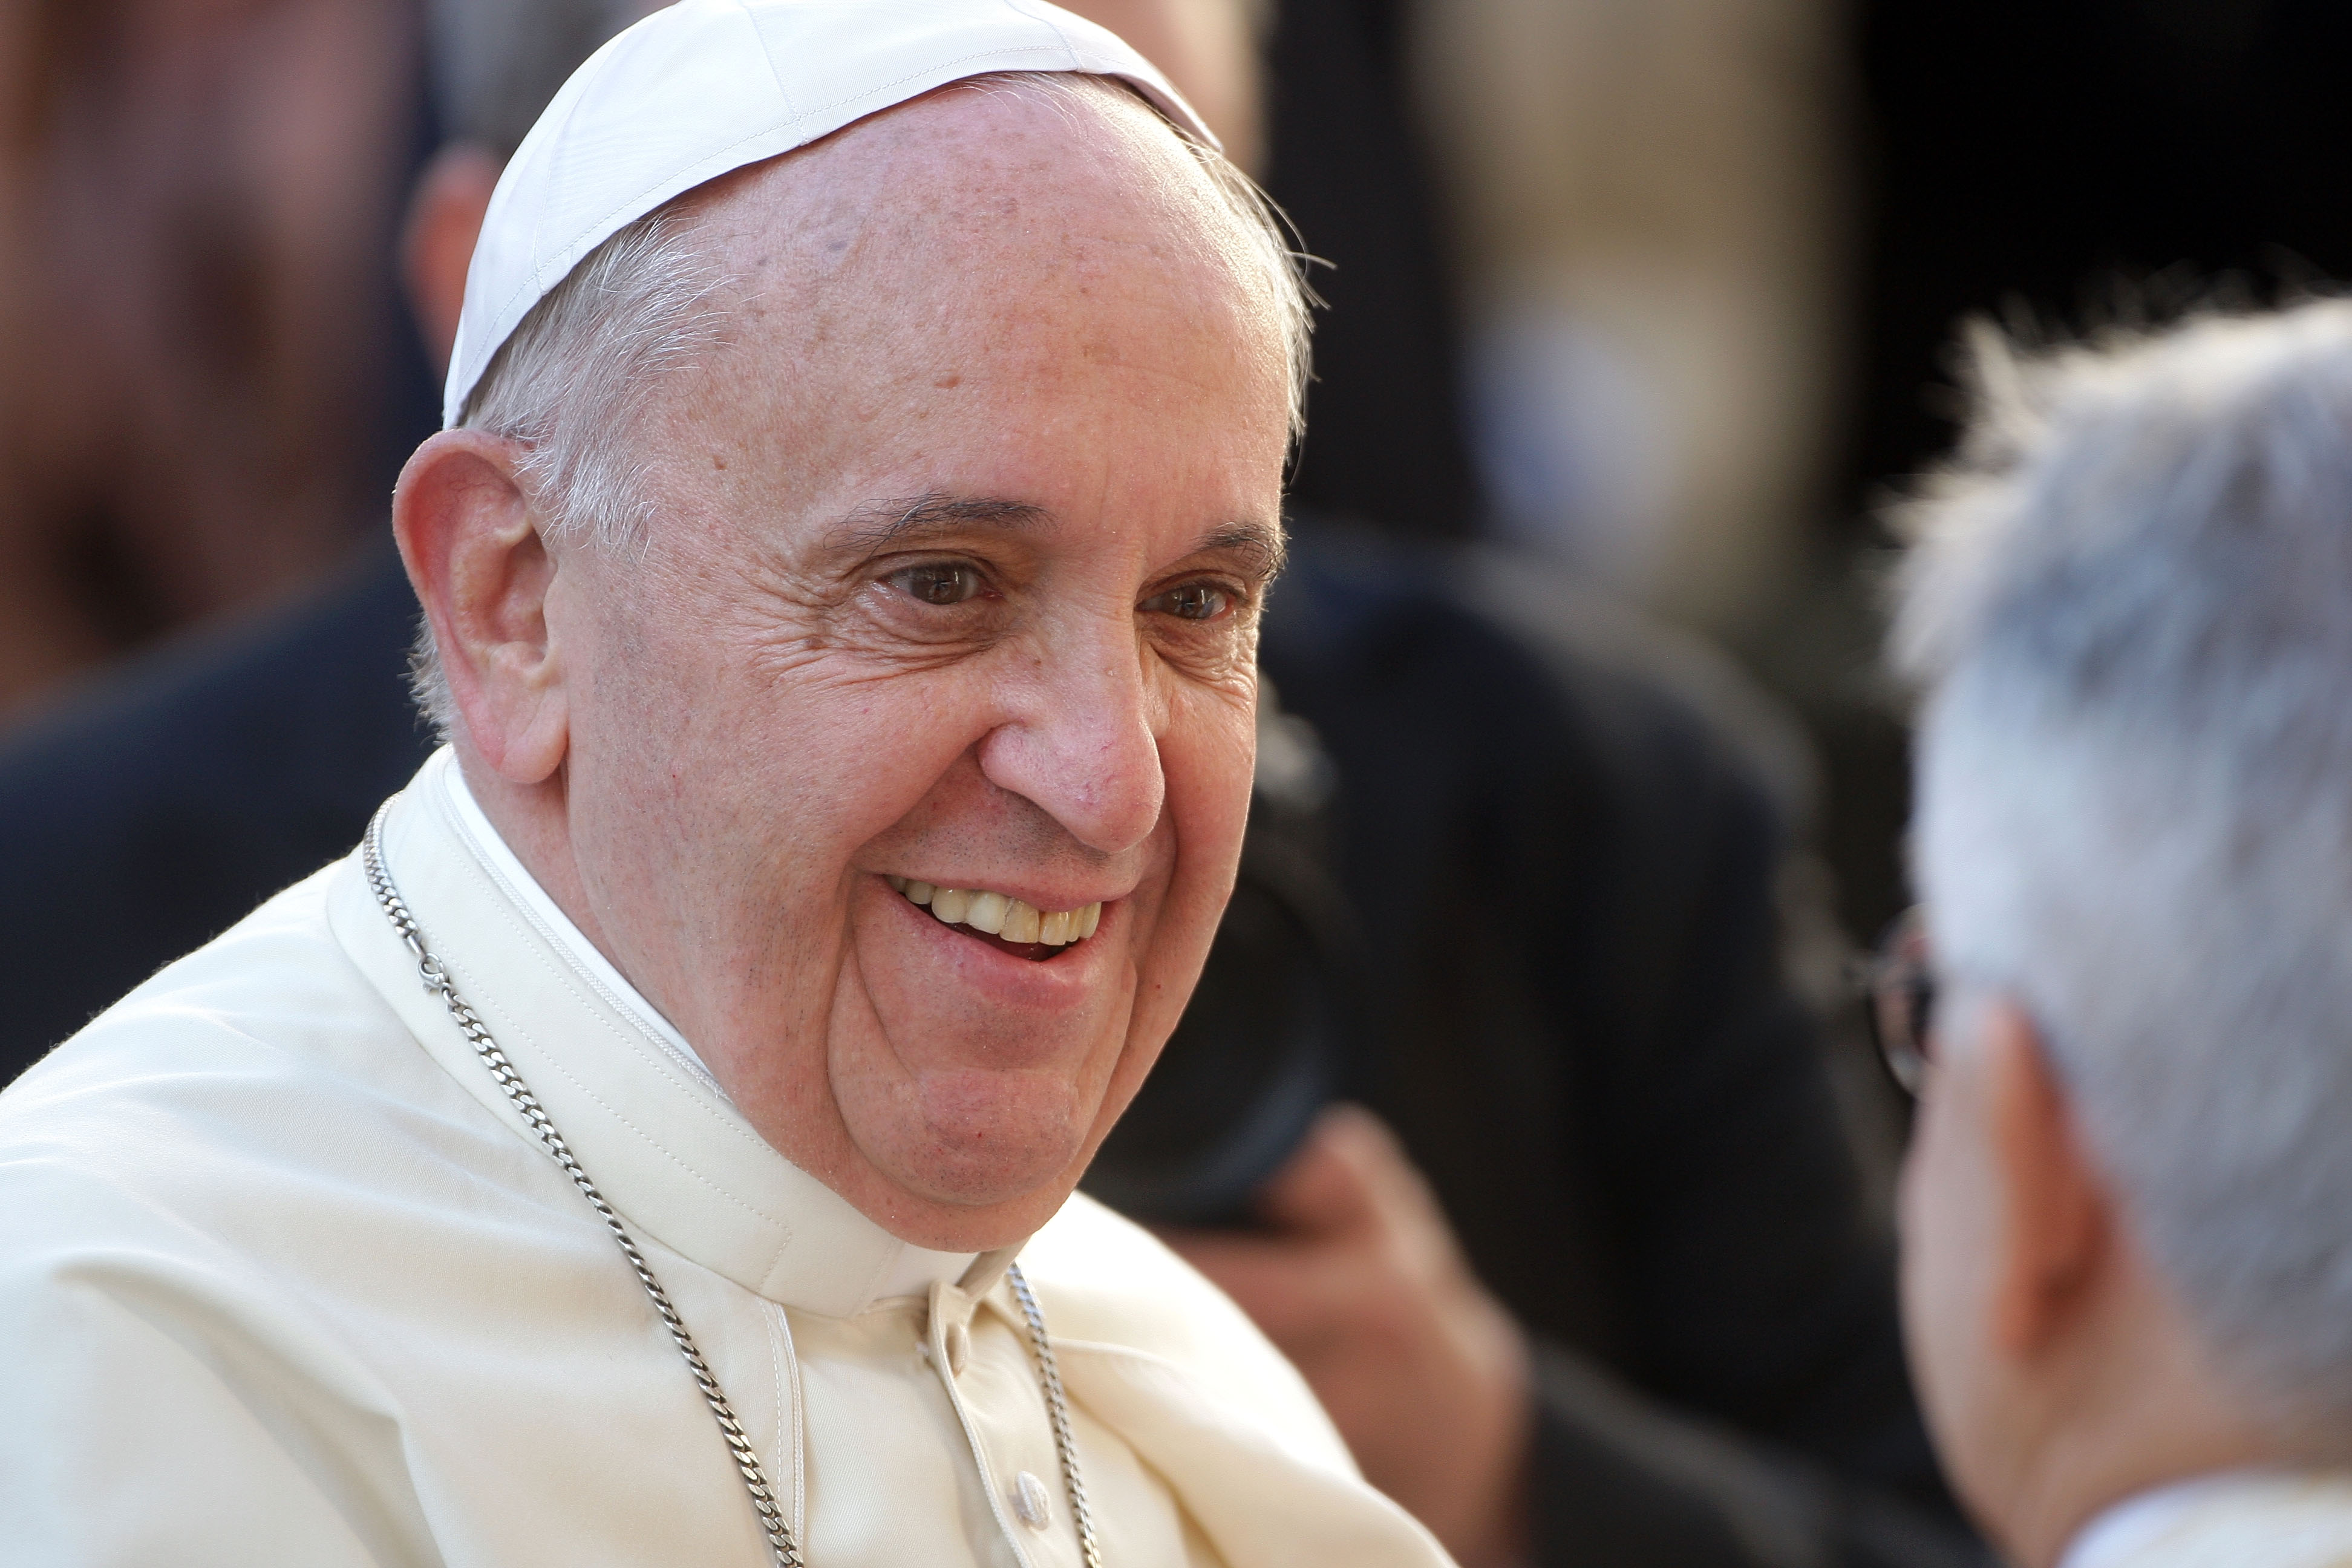 Pope Francis on April 24, 2014 in Rome, Italy. (Franco Origlia—Getty Images)